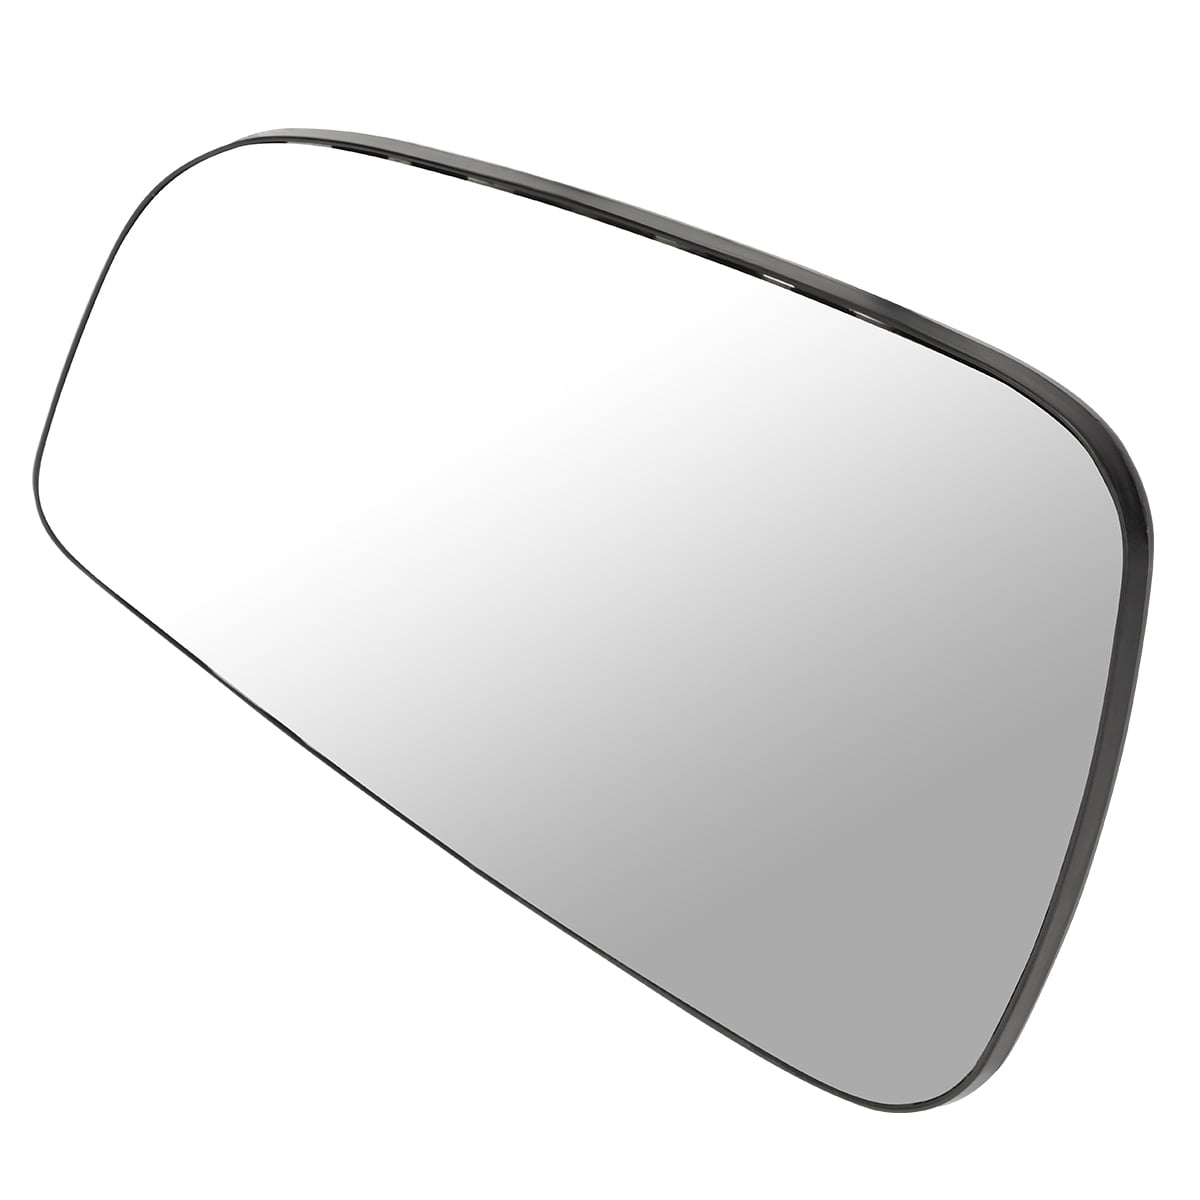 For Chevy Malibu 2008 ~ 2012 Chrome TOP Mirror Covers 08 09 10 11 12